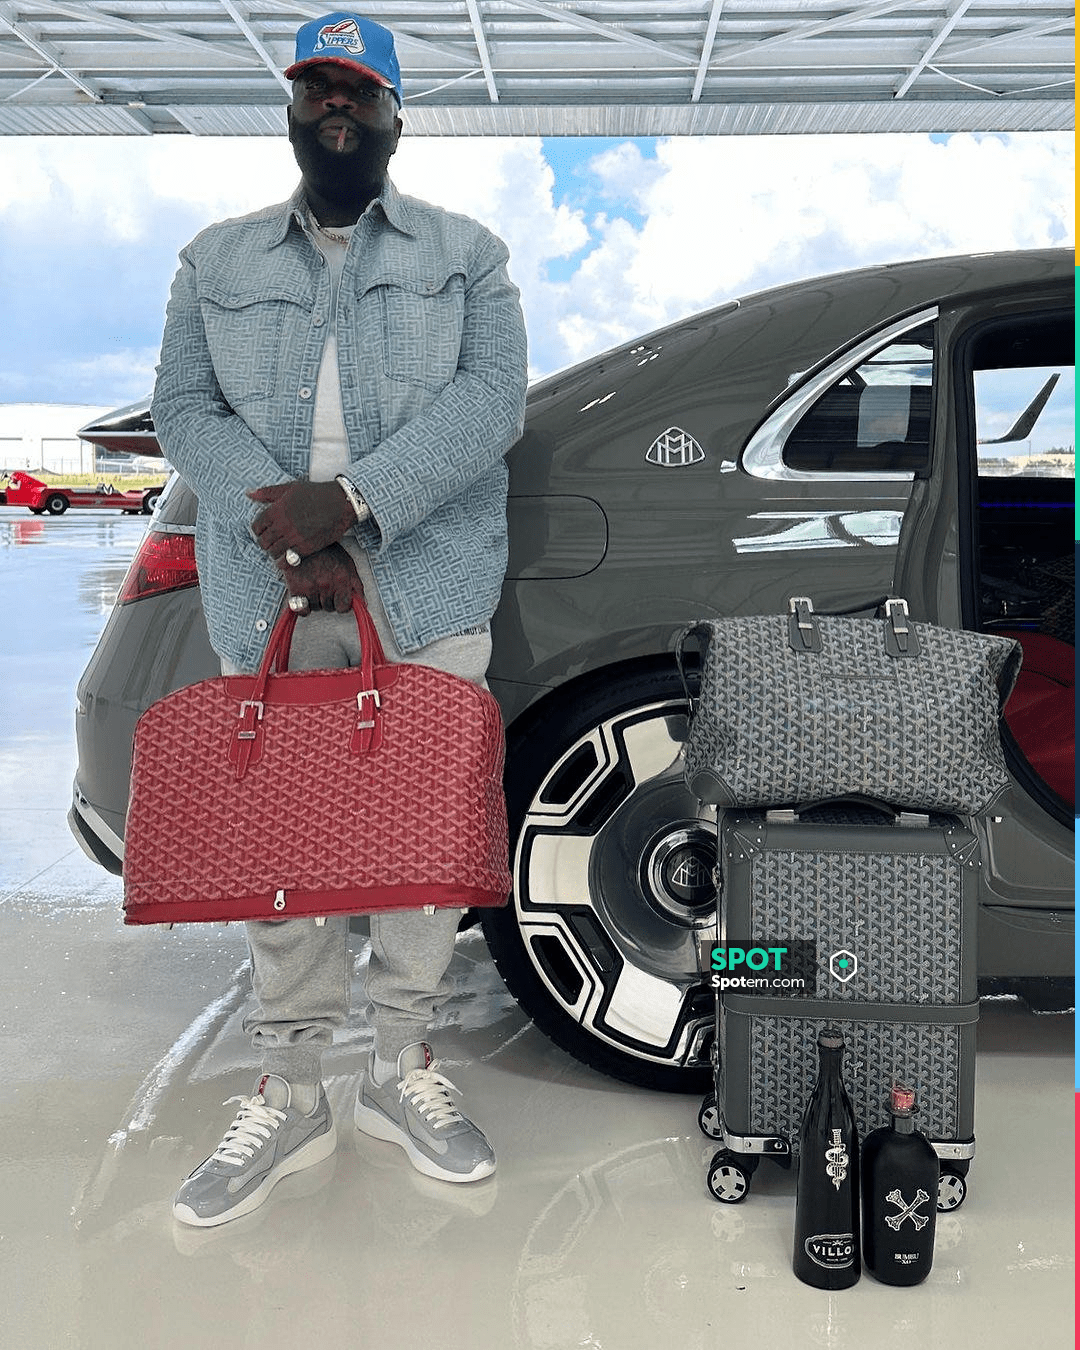 The Bourget suitcase by Goyard